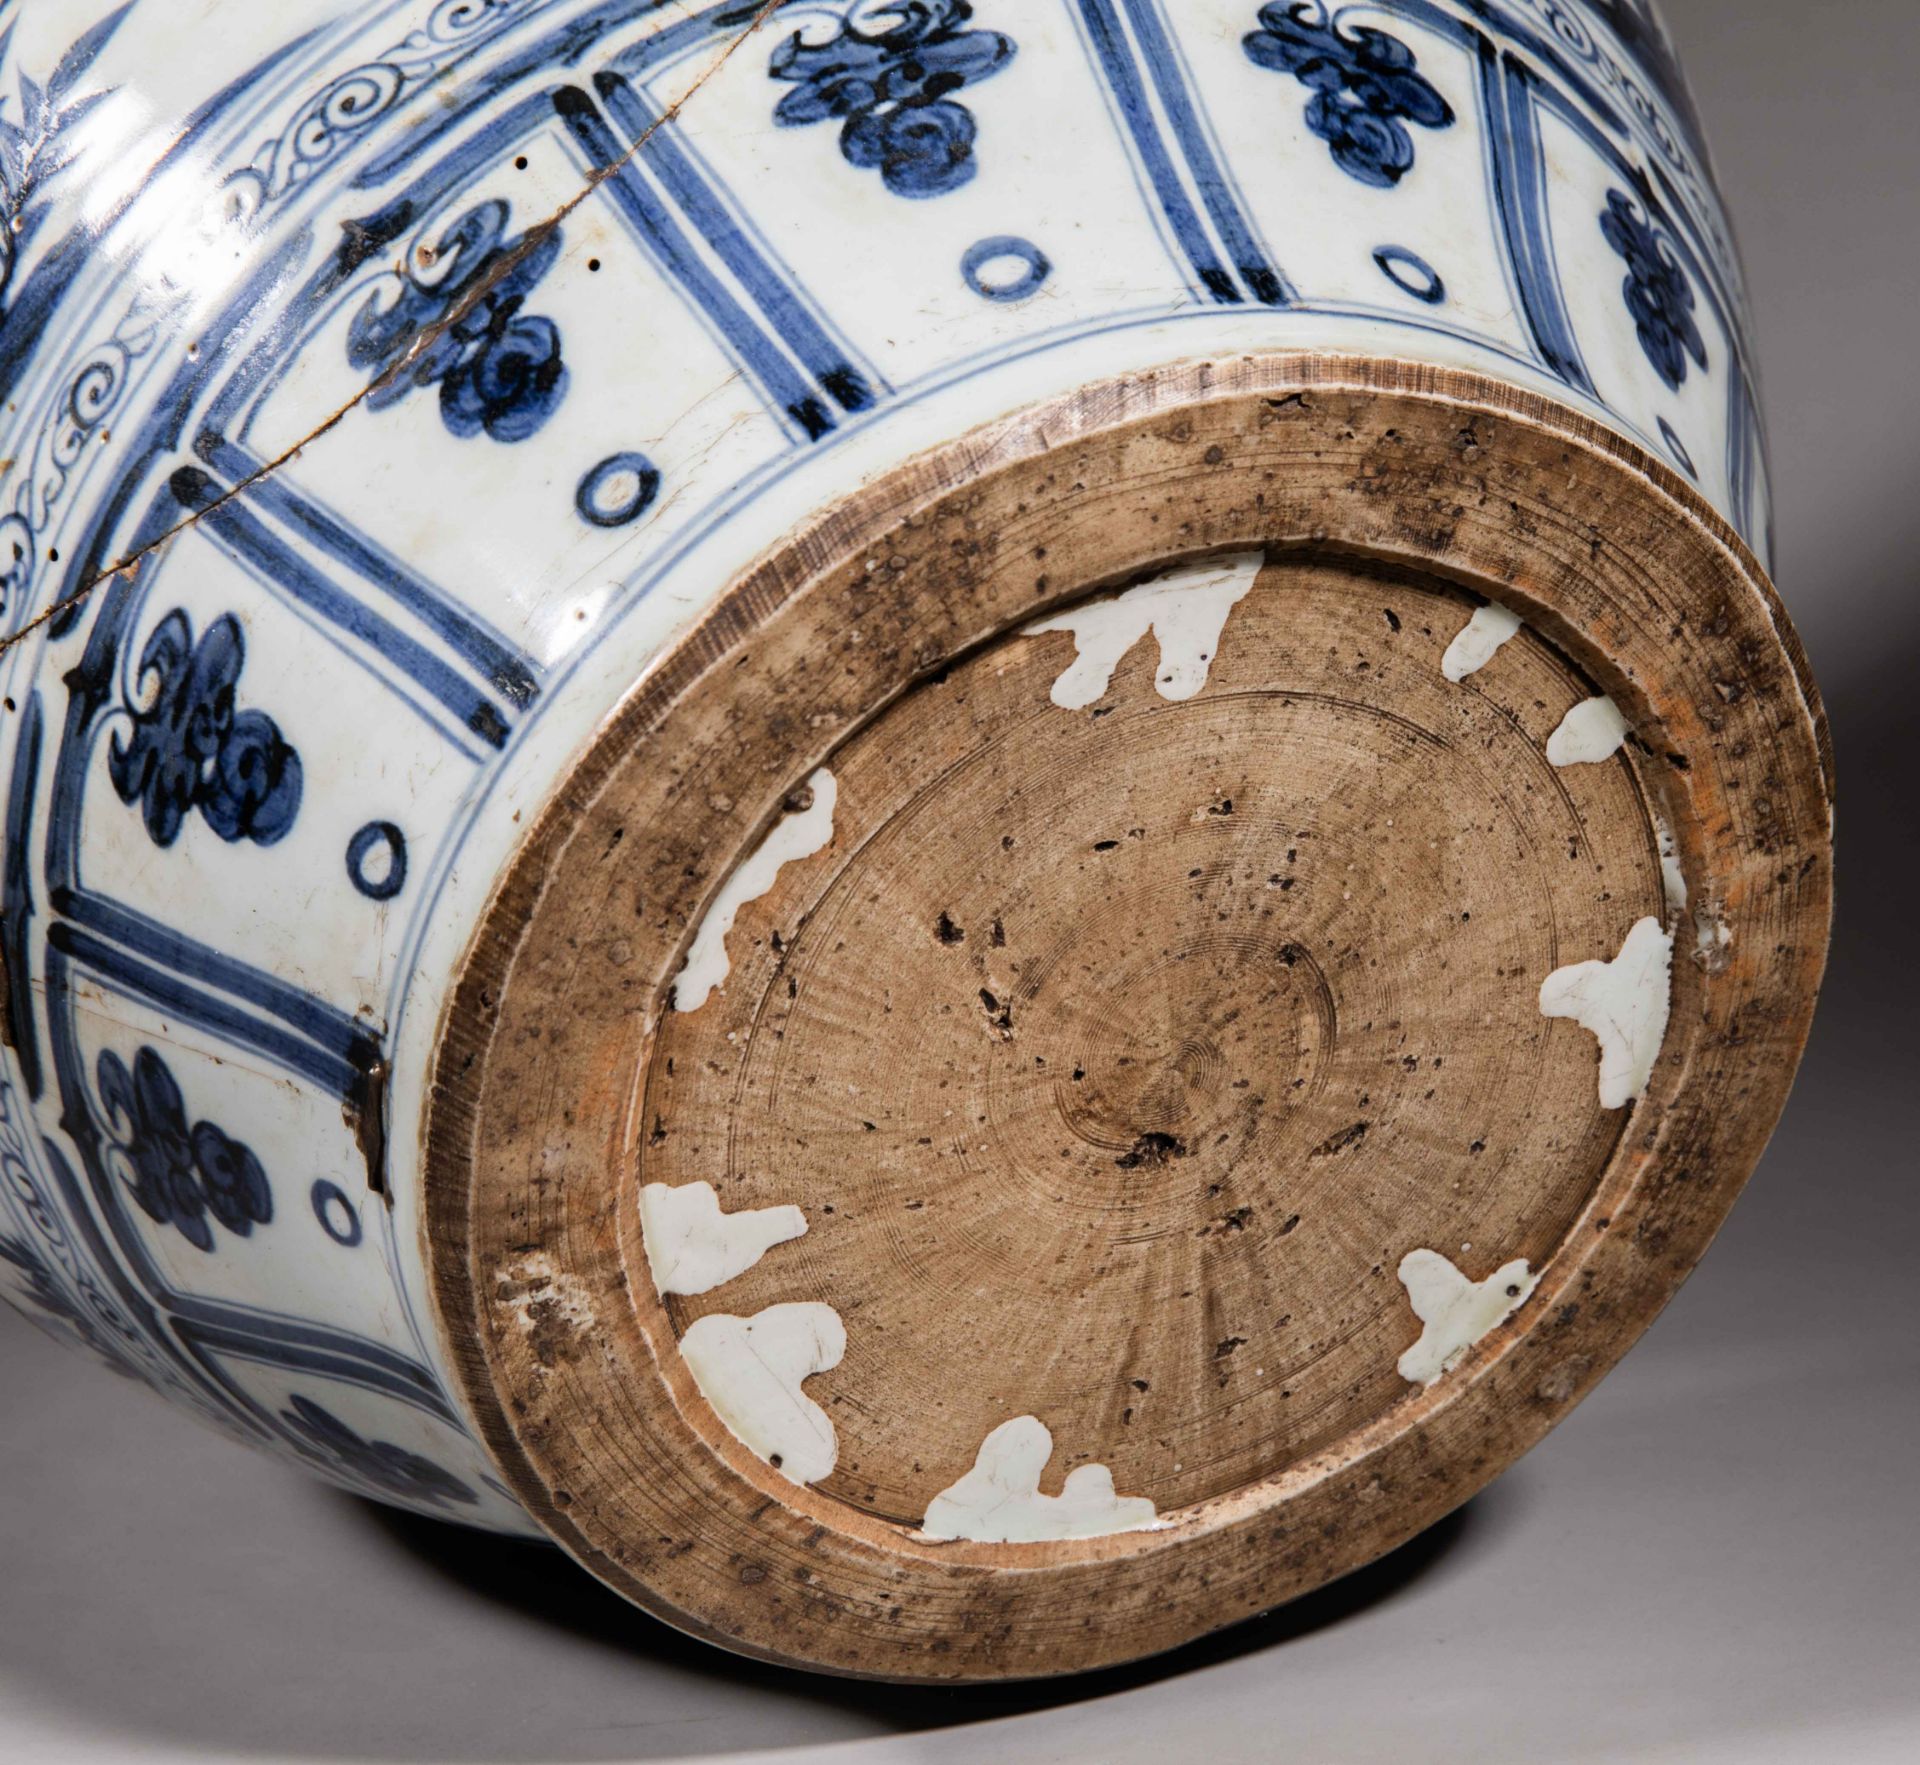 Blue and white porcelain vase from Yuan Dynasty - Image 9 of 9